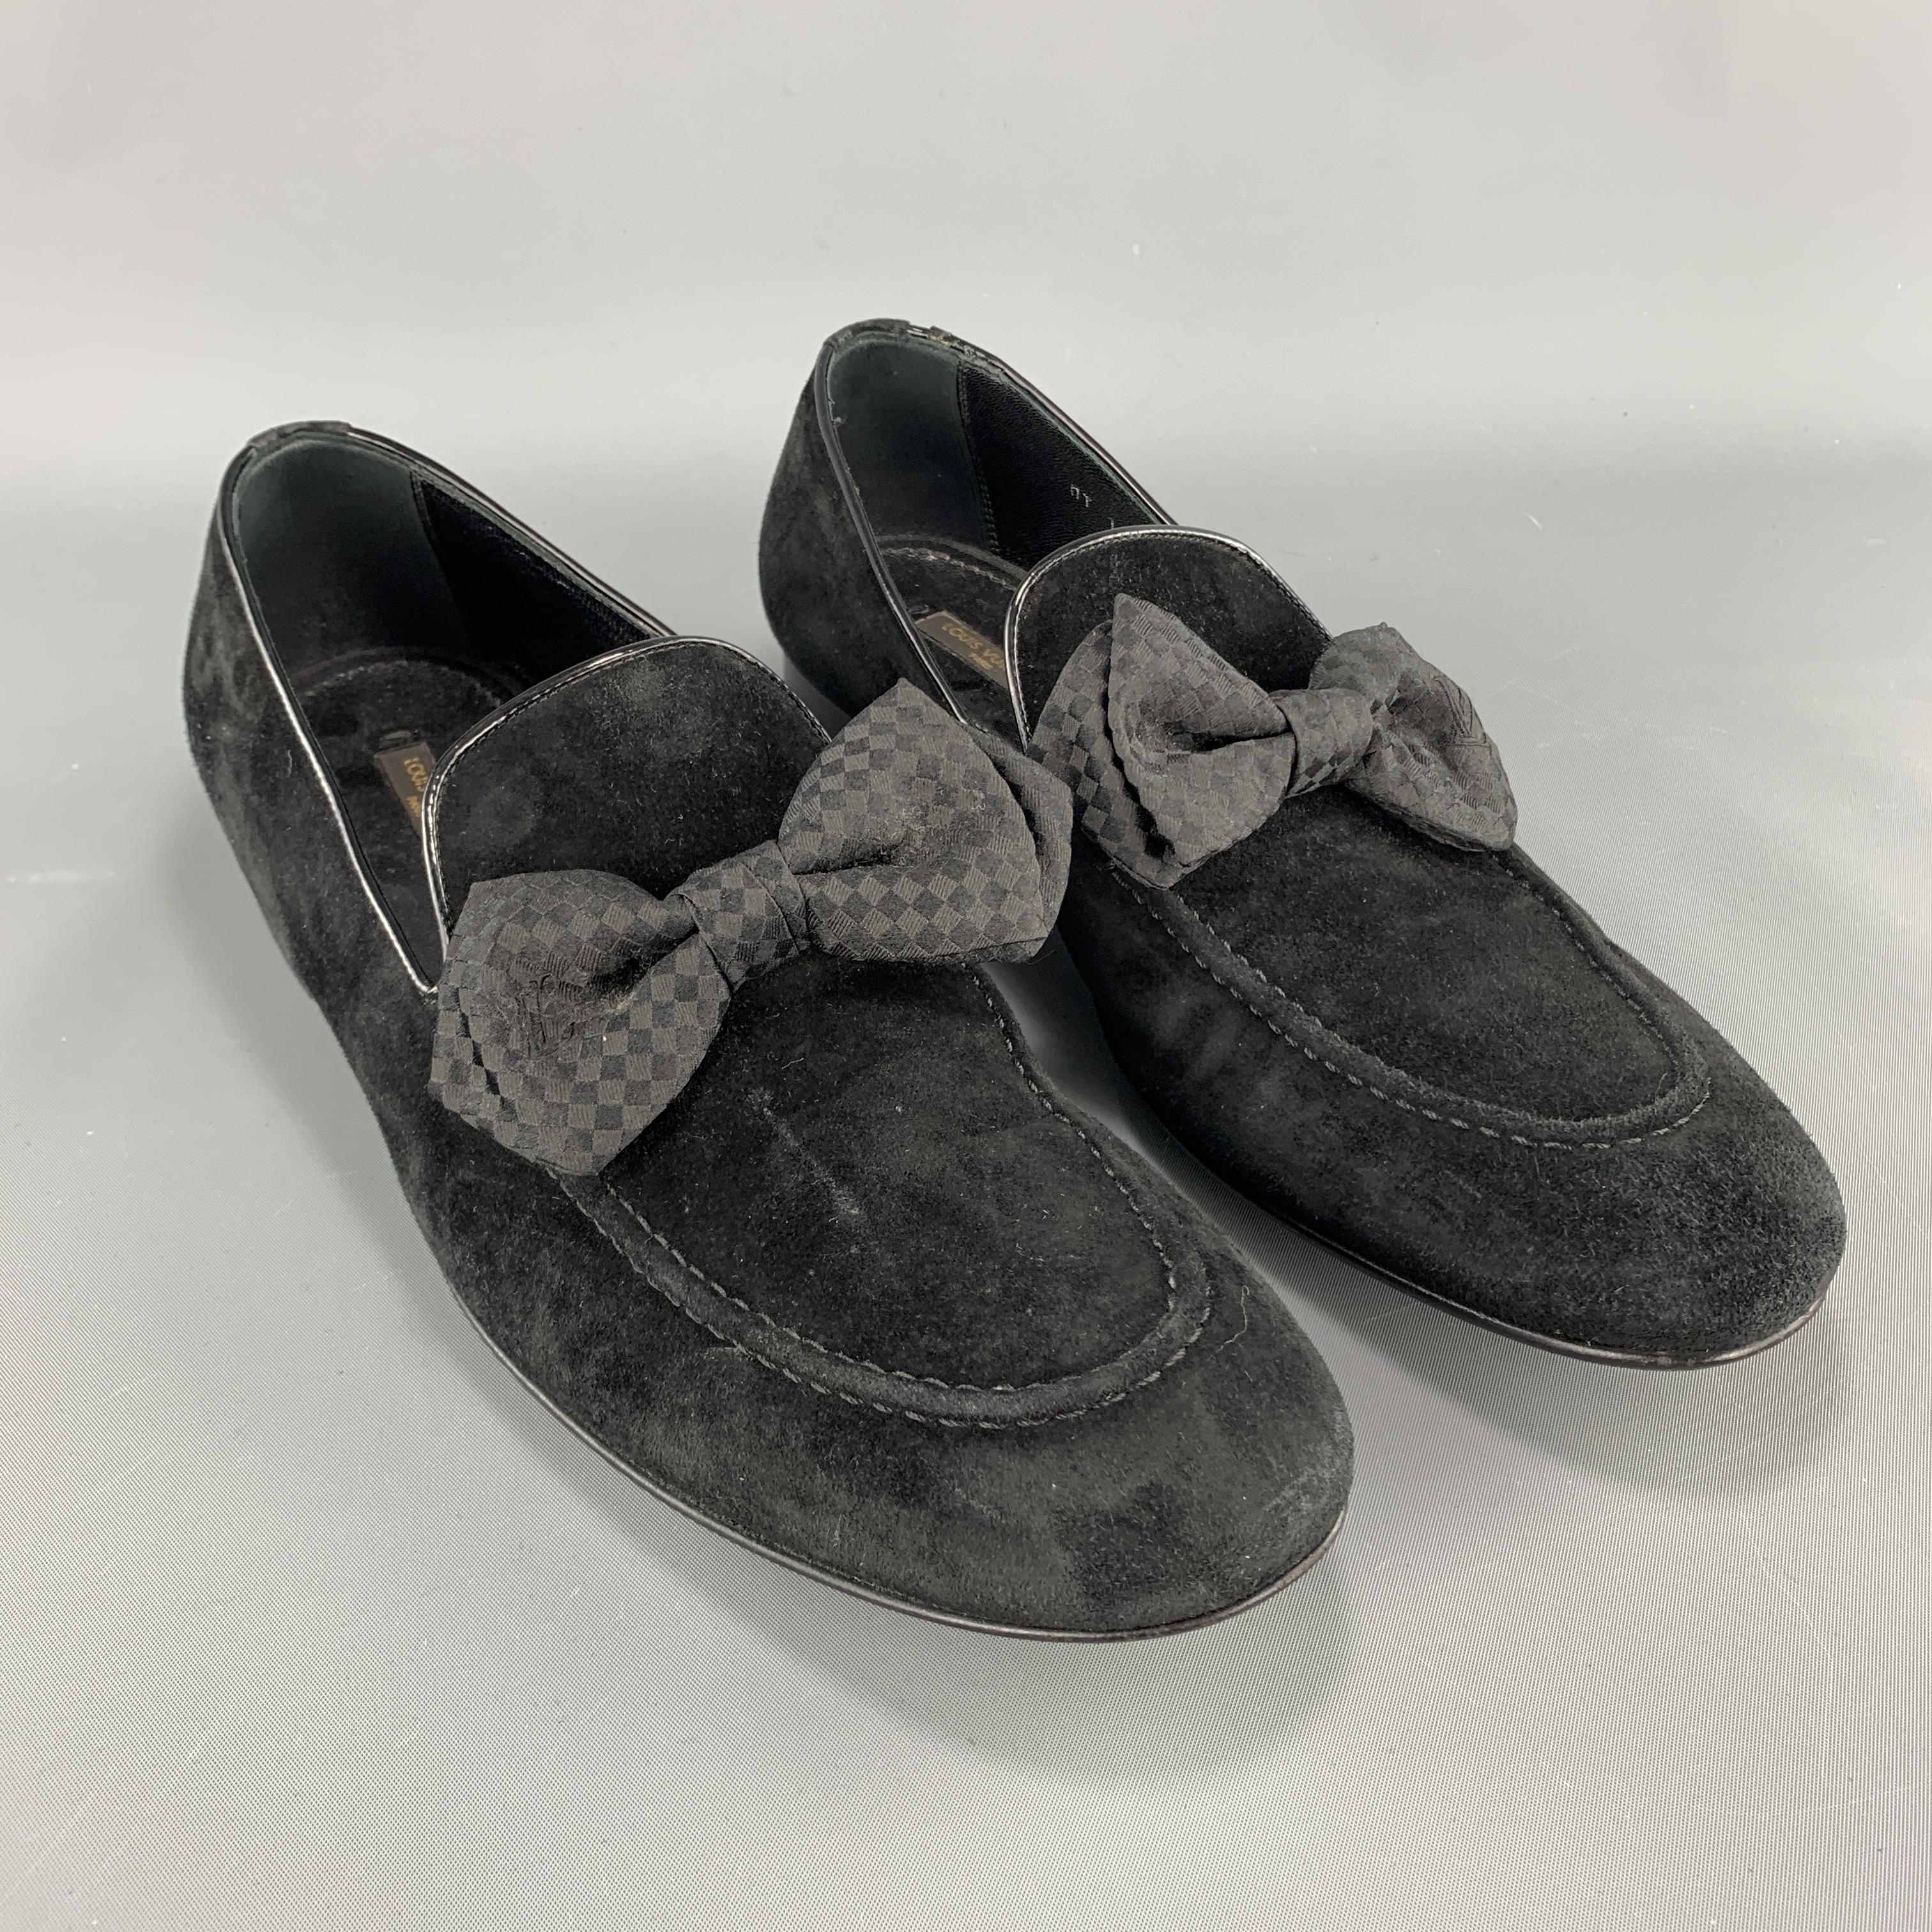 LOUIS VUITTON dress loafers come in black suede with a checkered bowtie detail. Wear throughout. As-is. Made in Italy.

Good Pre-Owned Condition.
Marked: UK 8

Outsole: 11.75 x 3.75 in.